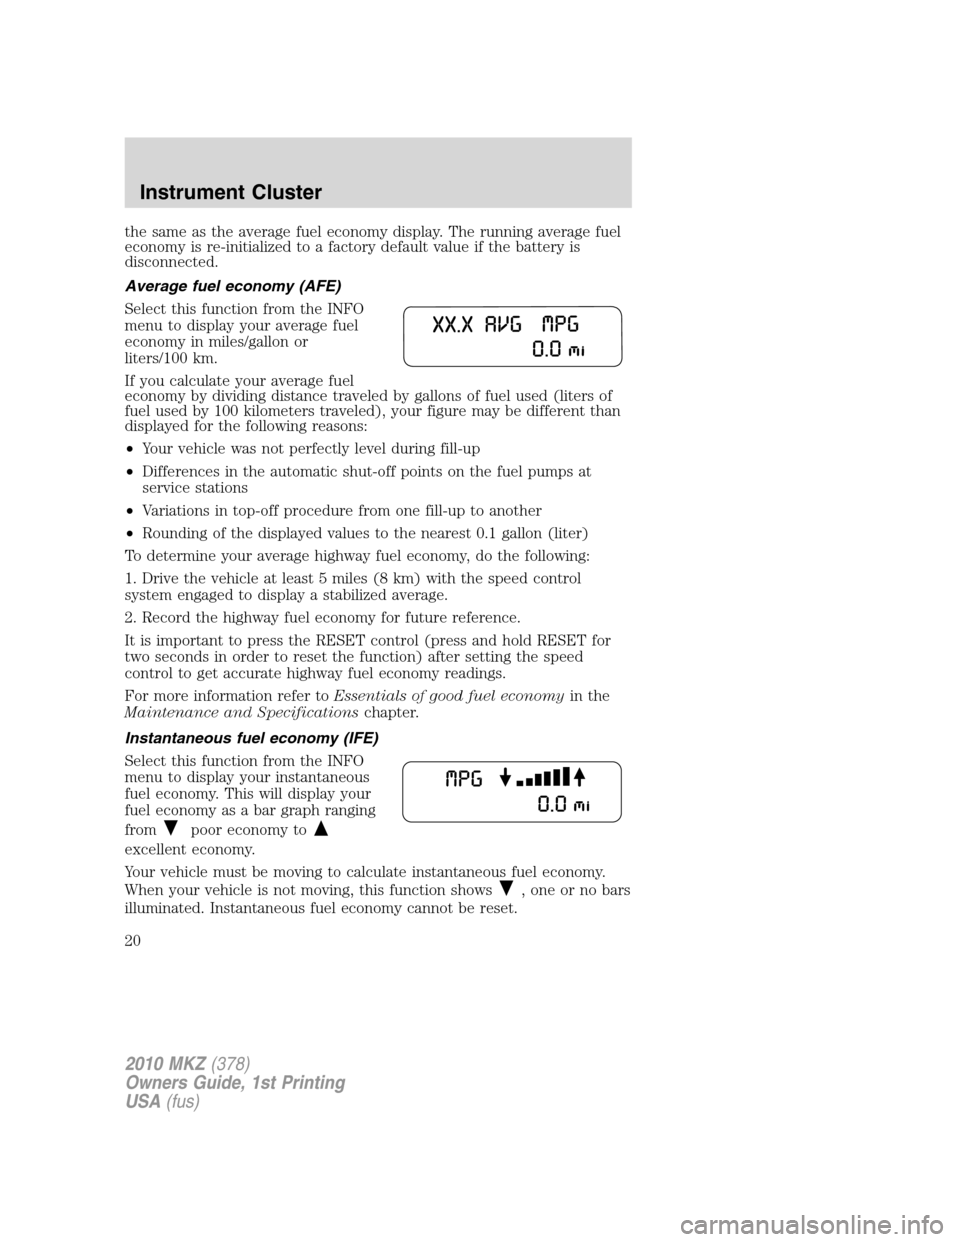 LINCOLN MKZ 2010  Owners Manual the same as the average fuel economy display. The running average fuel
economy is re-initialized to a factory default value if the battery is
disconnected.
Average fuel economy (AFE)
Select this funct